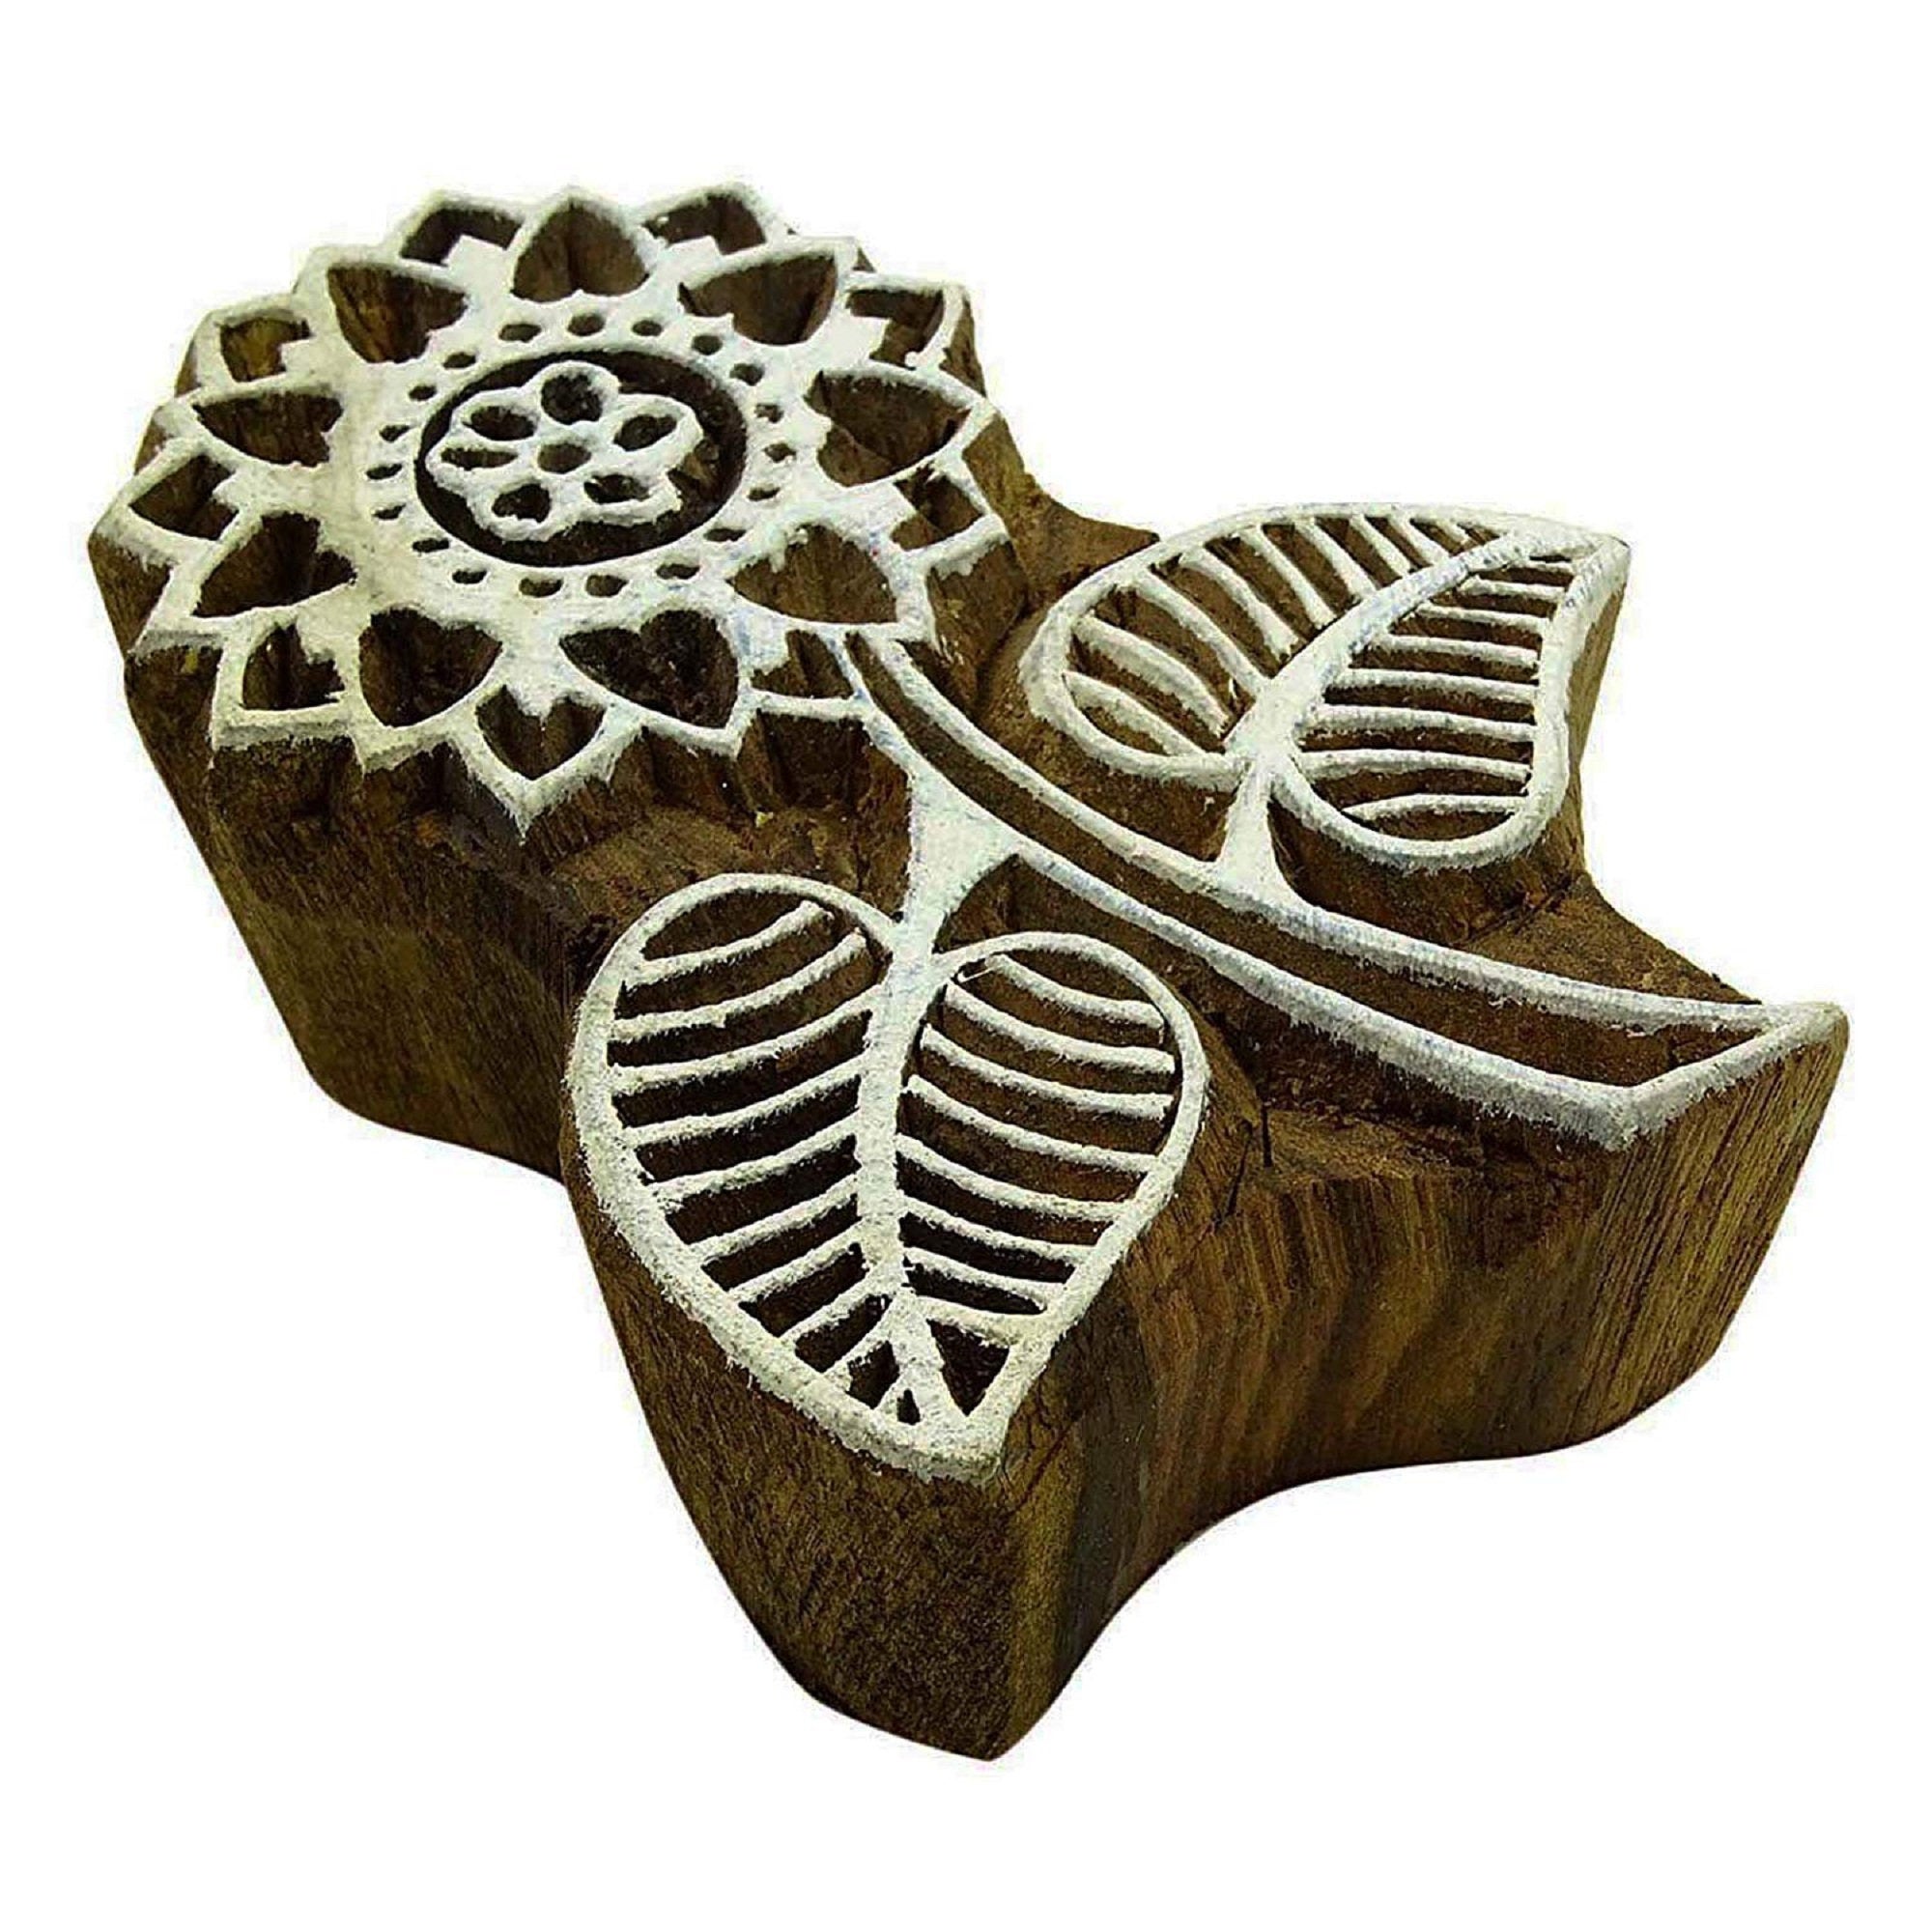 Decorative Floral Wooden Stamp Hand Carved Fabric Printing Block Textile Stamps